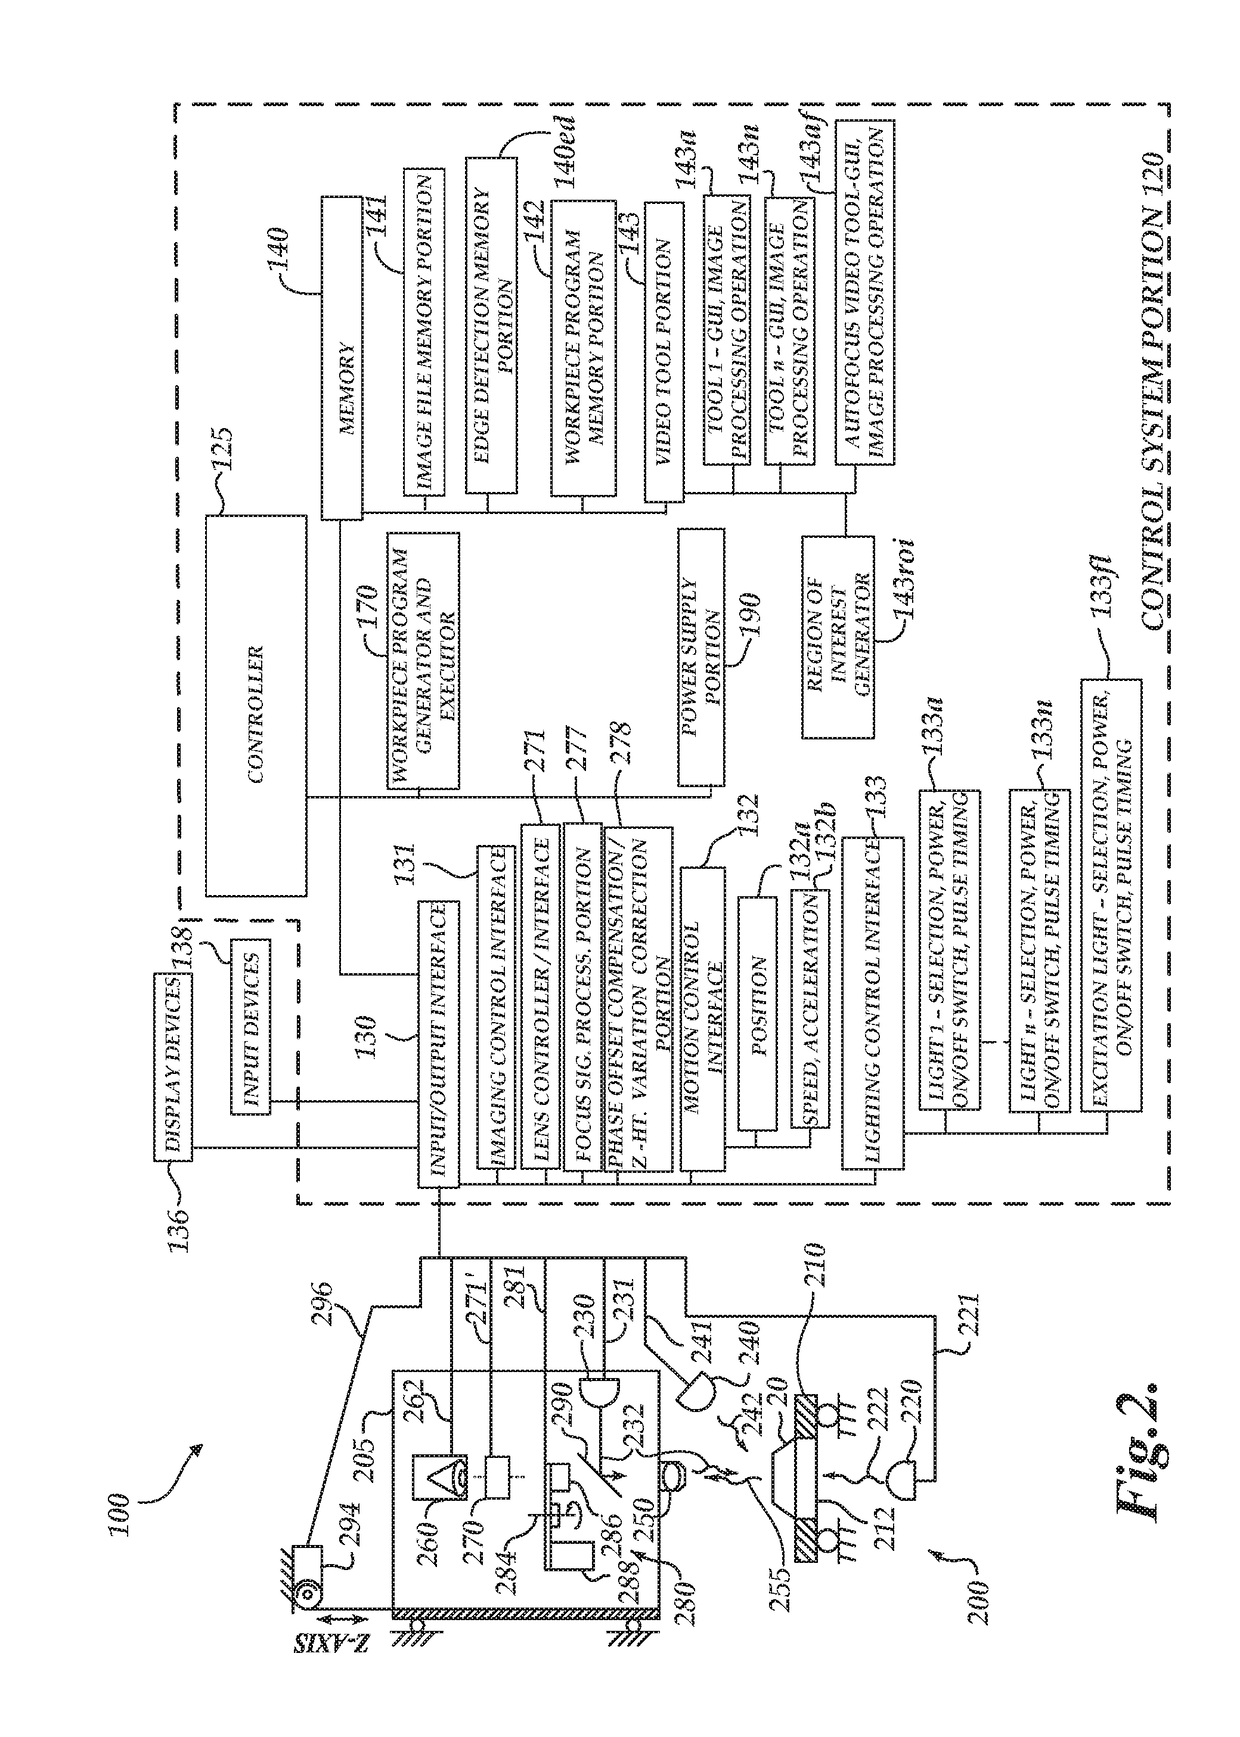 Autofocus system for a high speed periodically modulated variable focal length lens